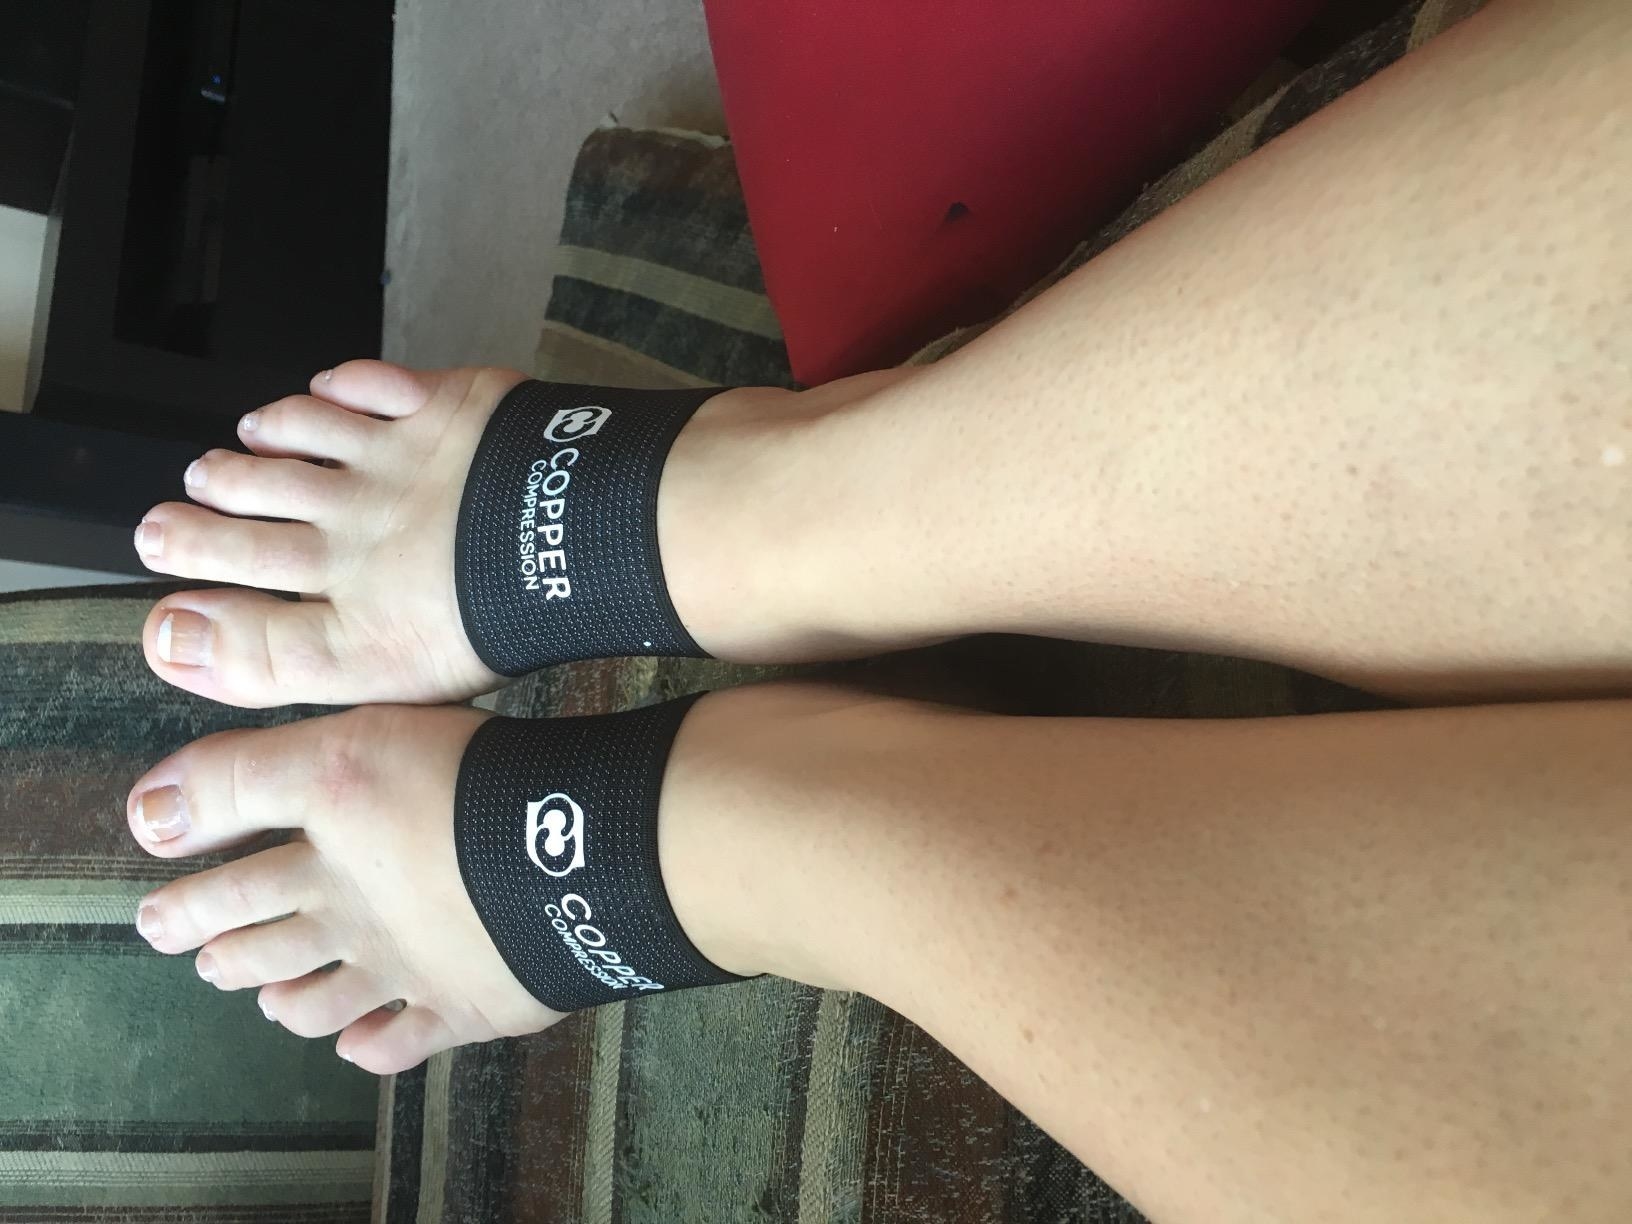 A reviewer's feet with the bands on